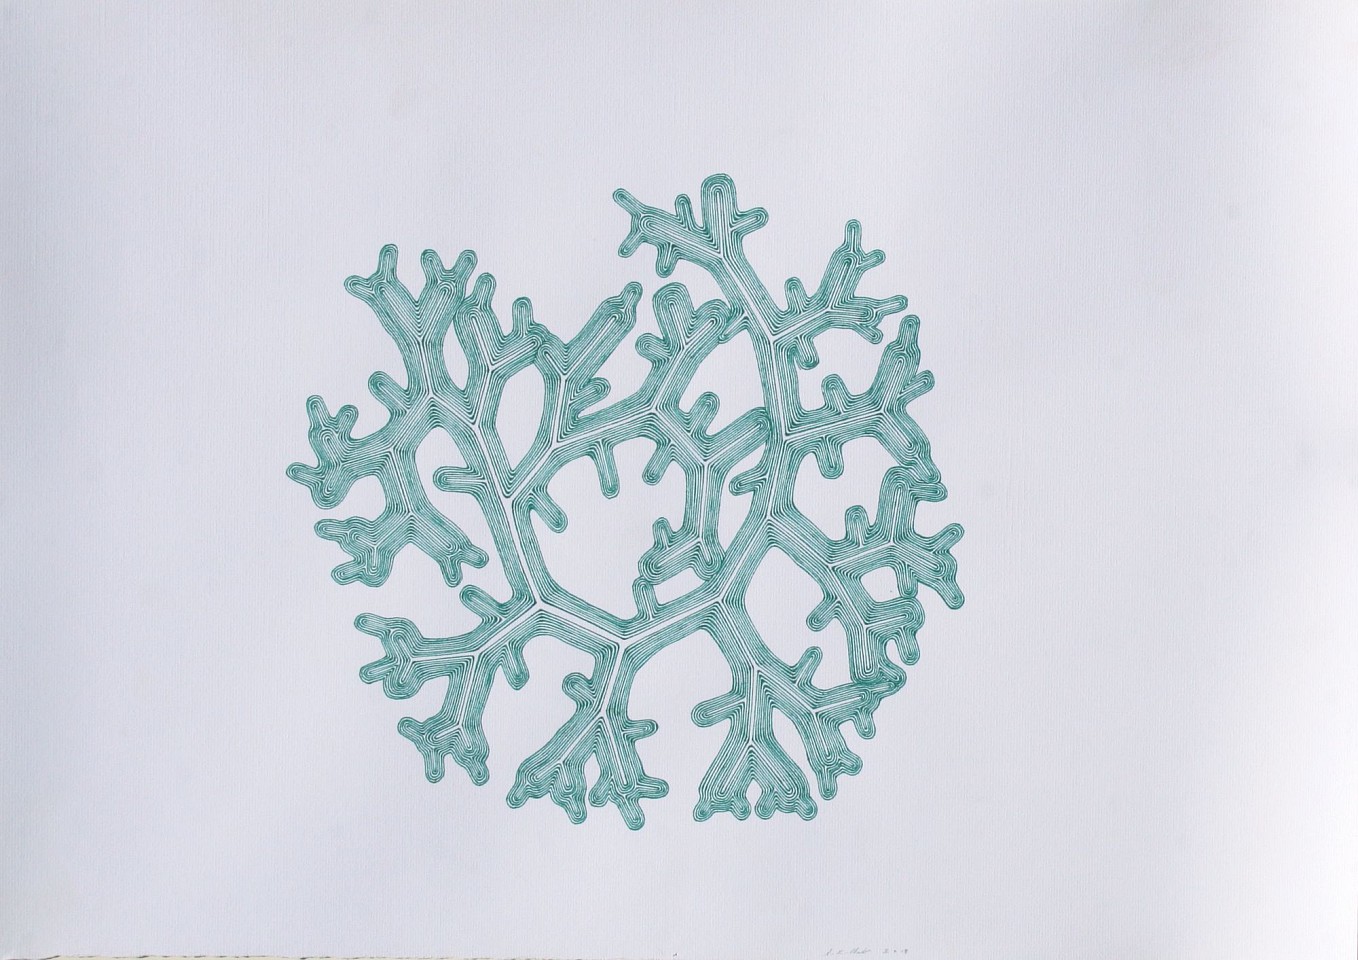 Stewart Helm, Abstract -Snoflake  Green-(Untitled), 2018
colored inks on paper, 20" x 28.5" unframed
SH-597
Price Upon Request